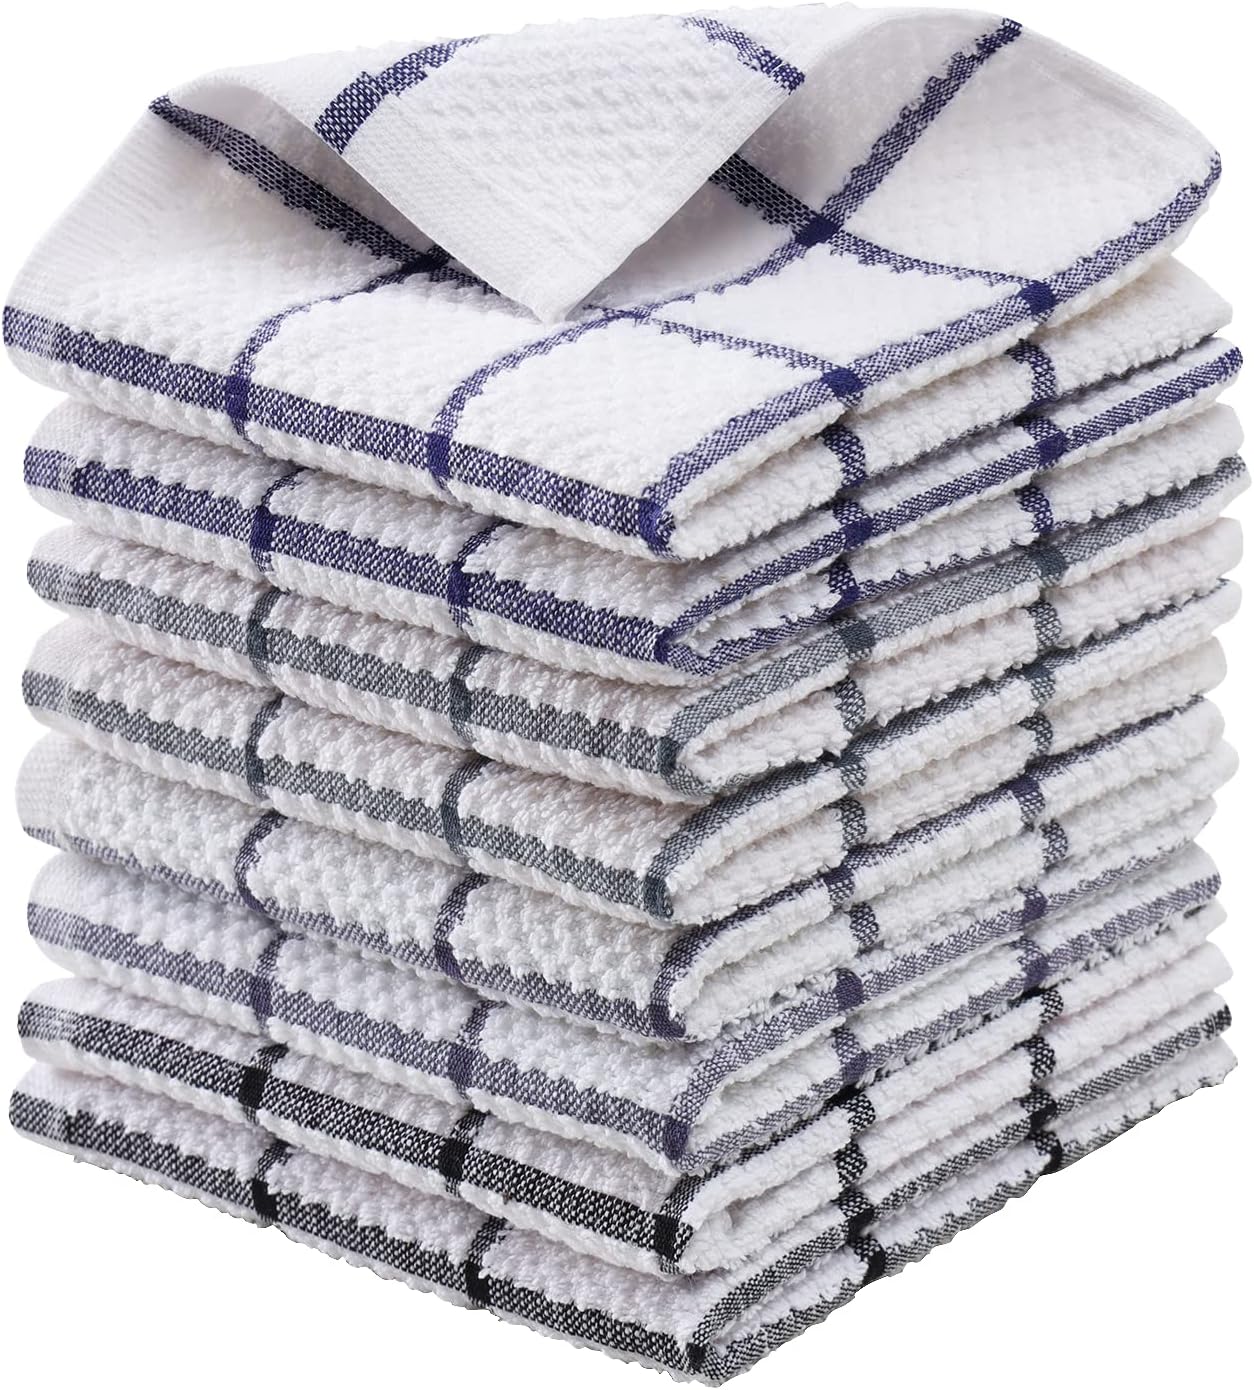 PPAXL Cotton Dish Towels for Kitchen, Terry Dish Cloths for Washing Dishes,  12